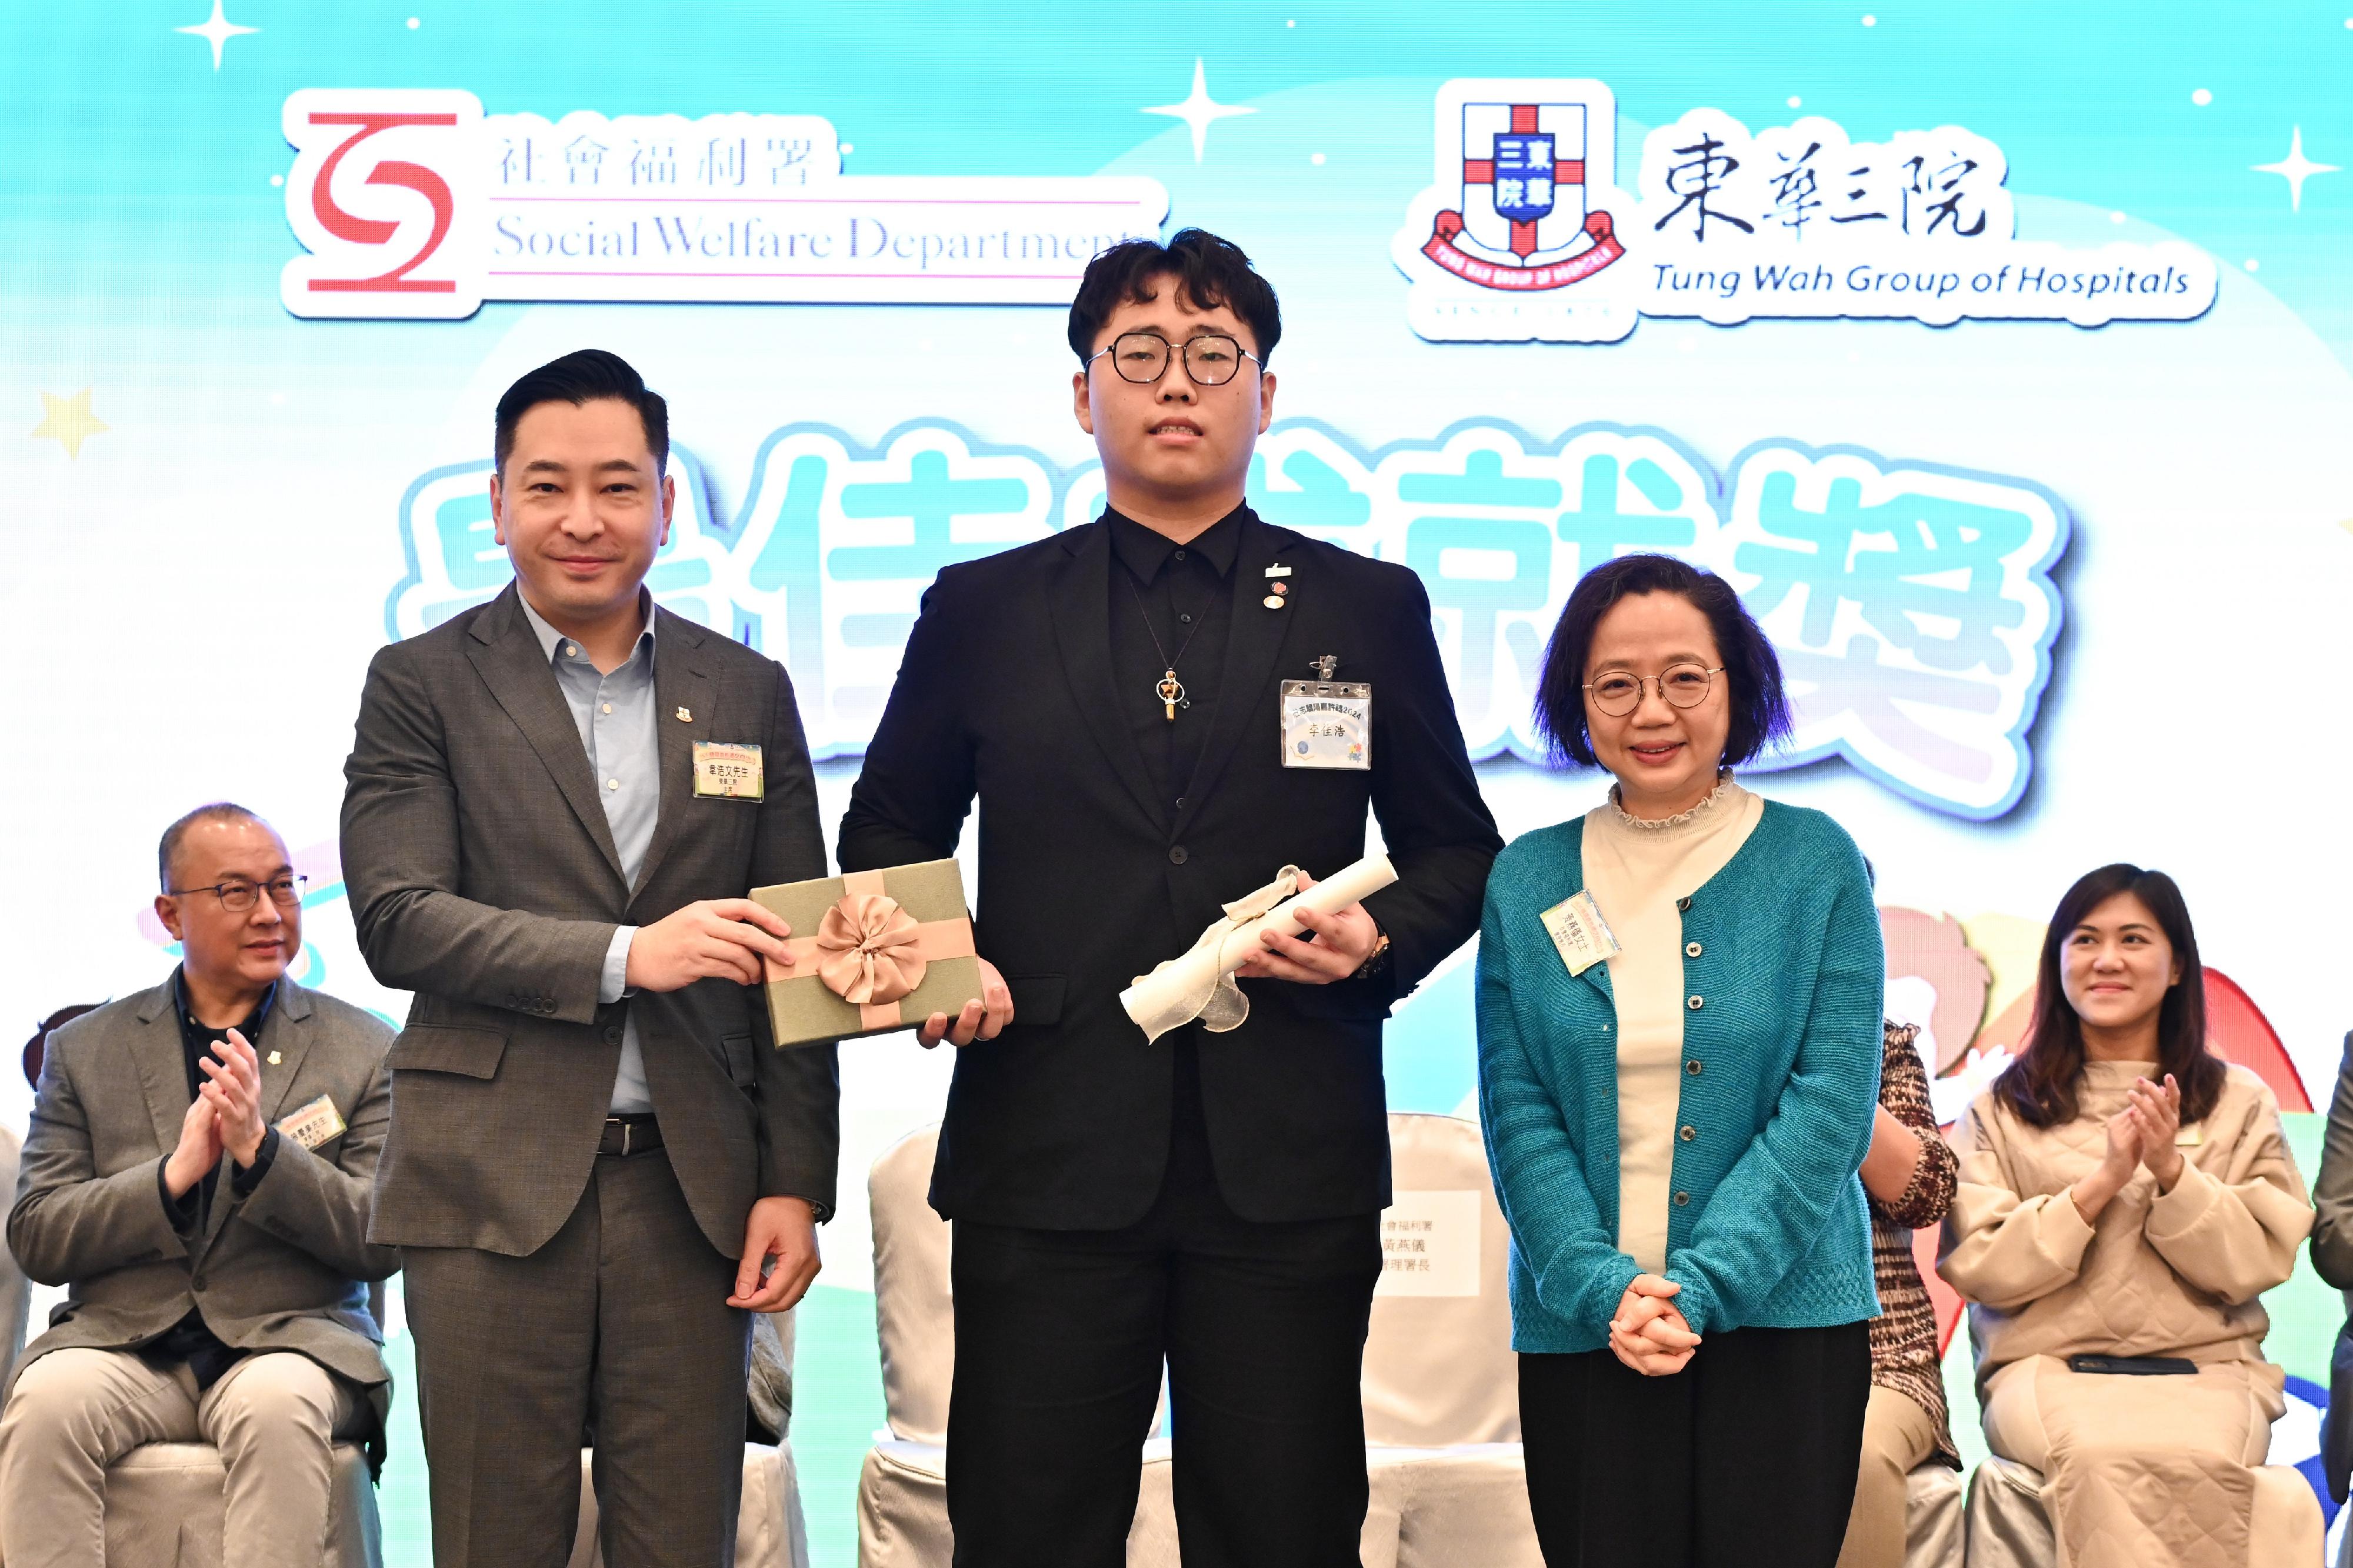 The Acting Director of Social Welfare (DSW), Ms Wong Yin-yee (right), and the Chairman of the Board of Directors of the Tung Wah Group of Hospitals, Mr Herman Wai (left), present a certificate to an awardee (centre) of the Best Achievement Award at the 2024 Award Presentation Ceremony for DSW wards today (March 16).